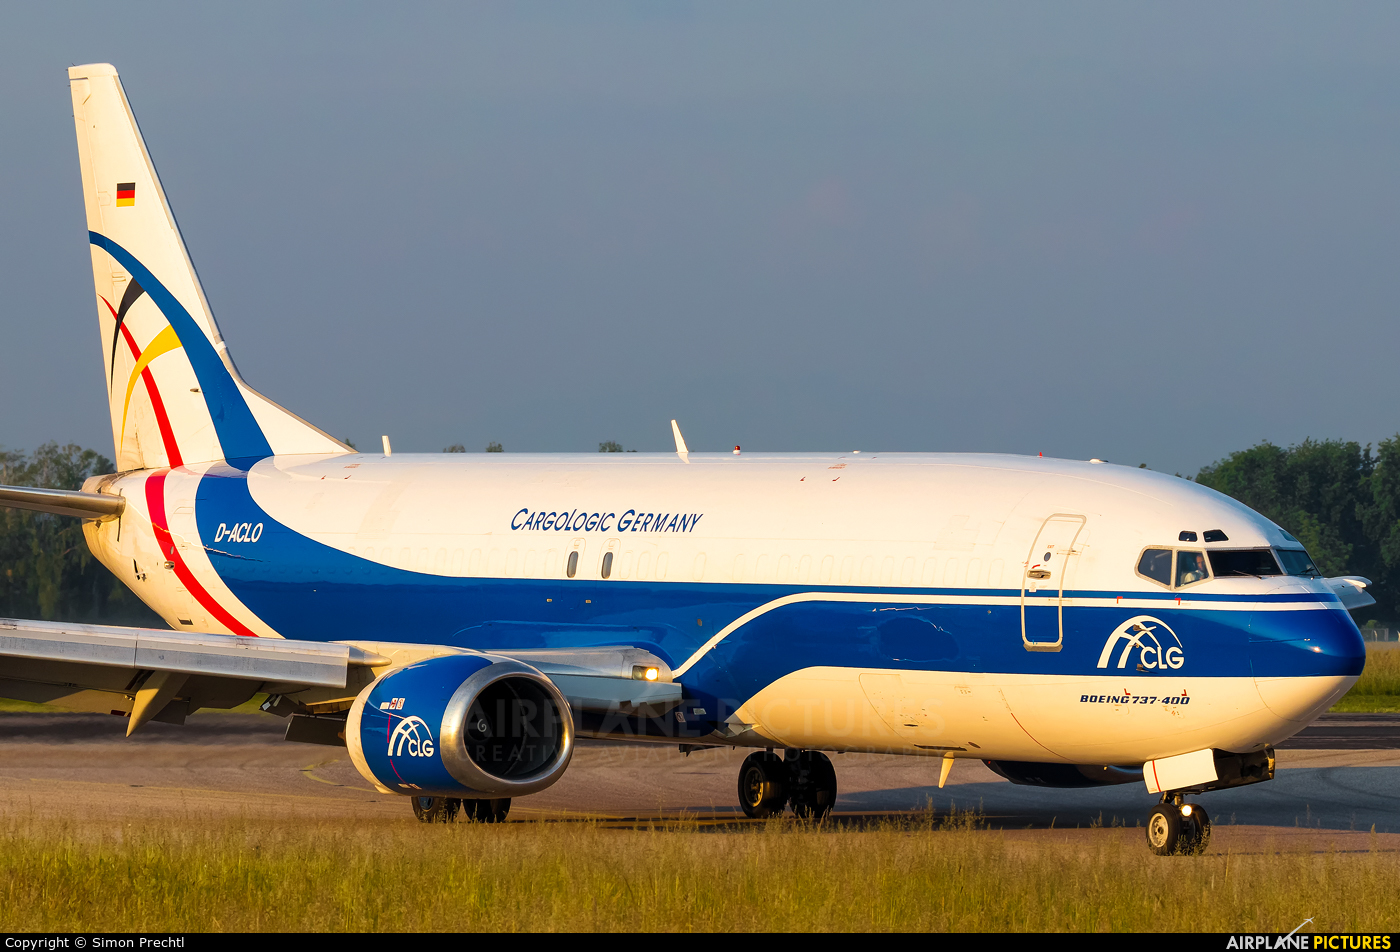 CargoLogic Germany D-ACLO aircraft at Linz